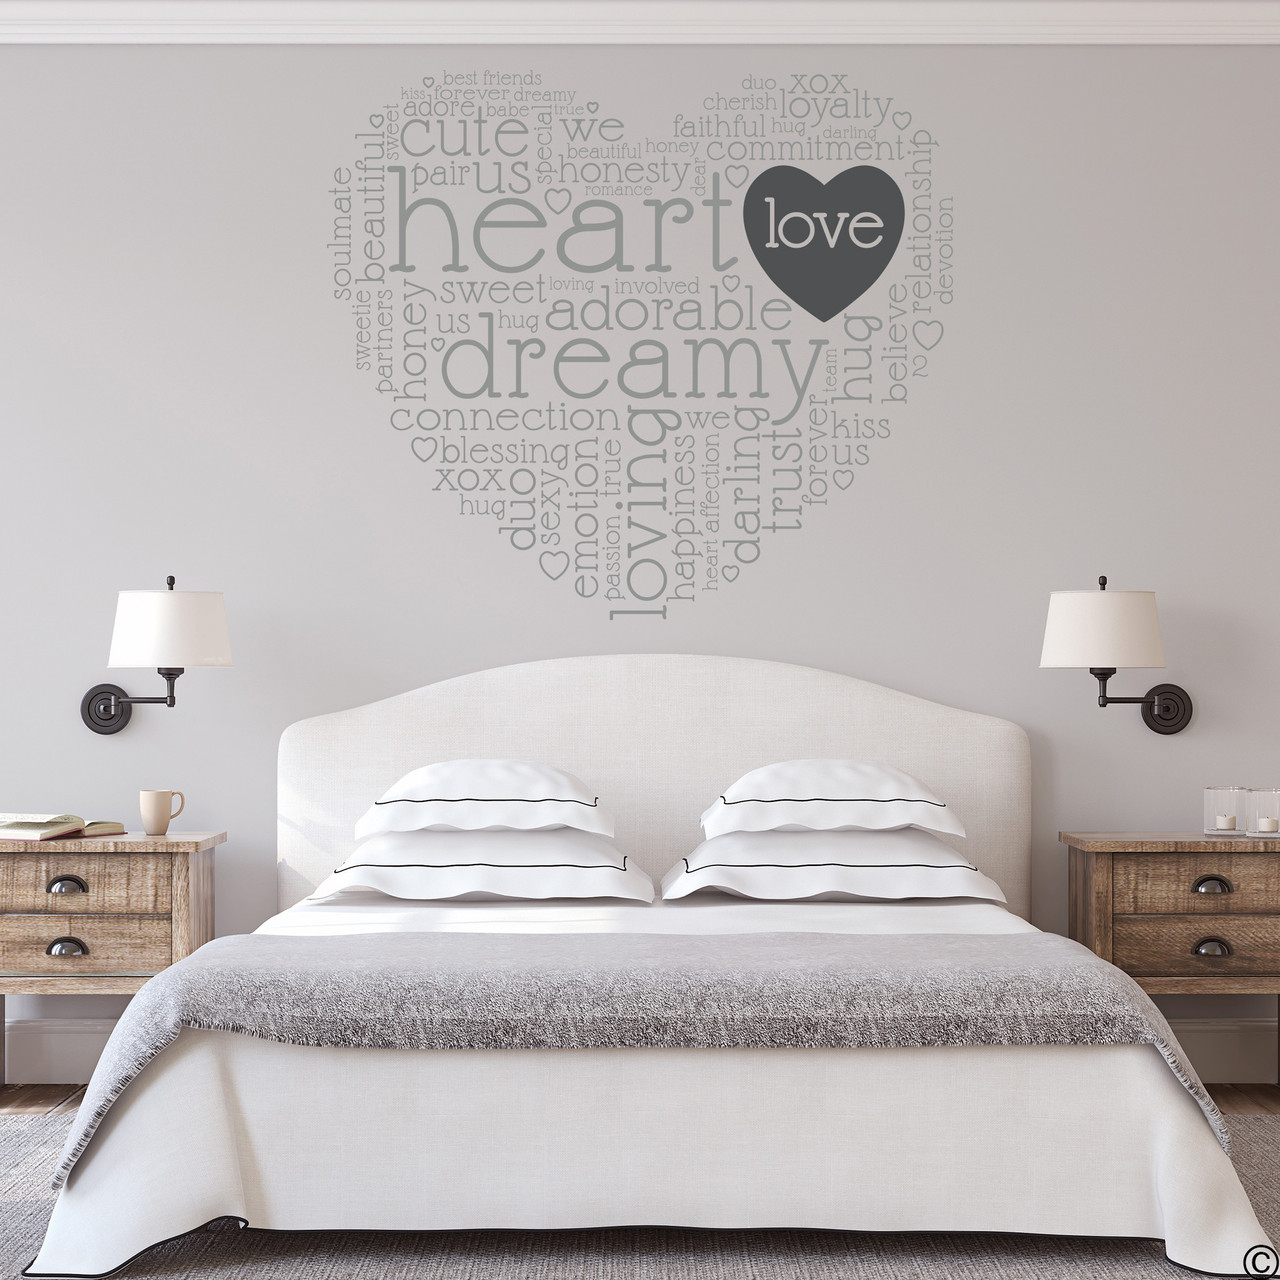 The dreamy heart wall decal quote in light grey with dark grey vinyl love heart.